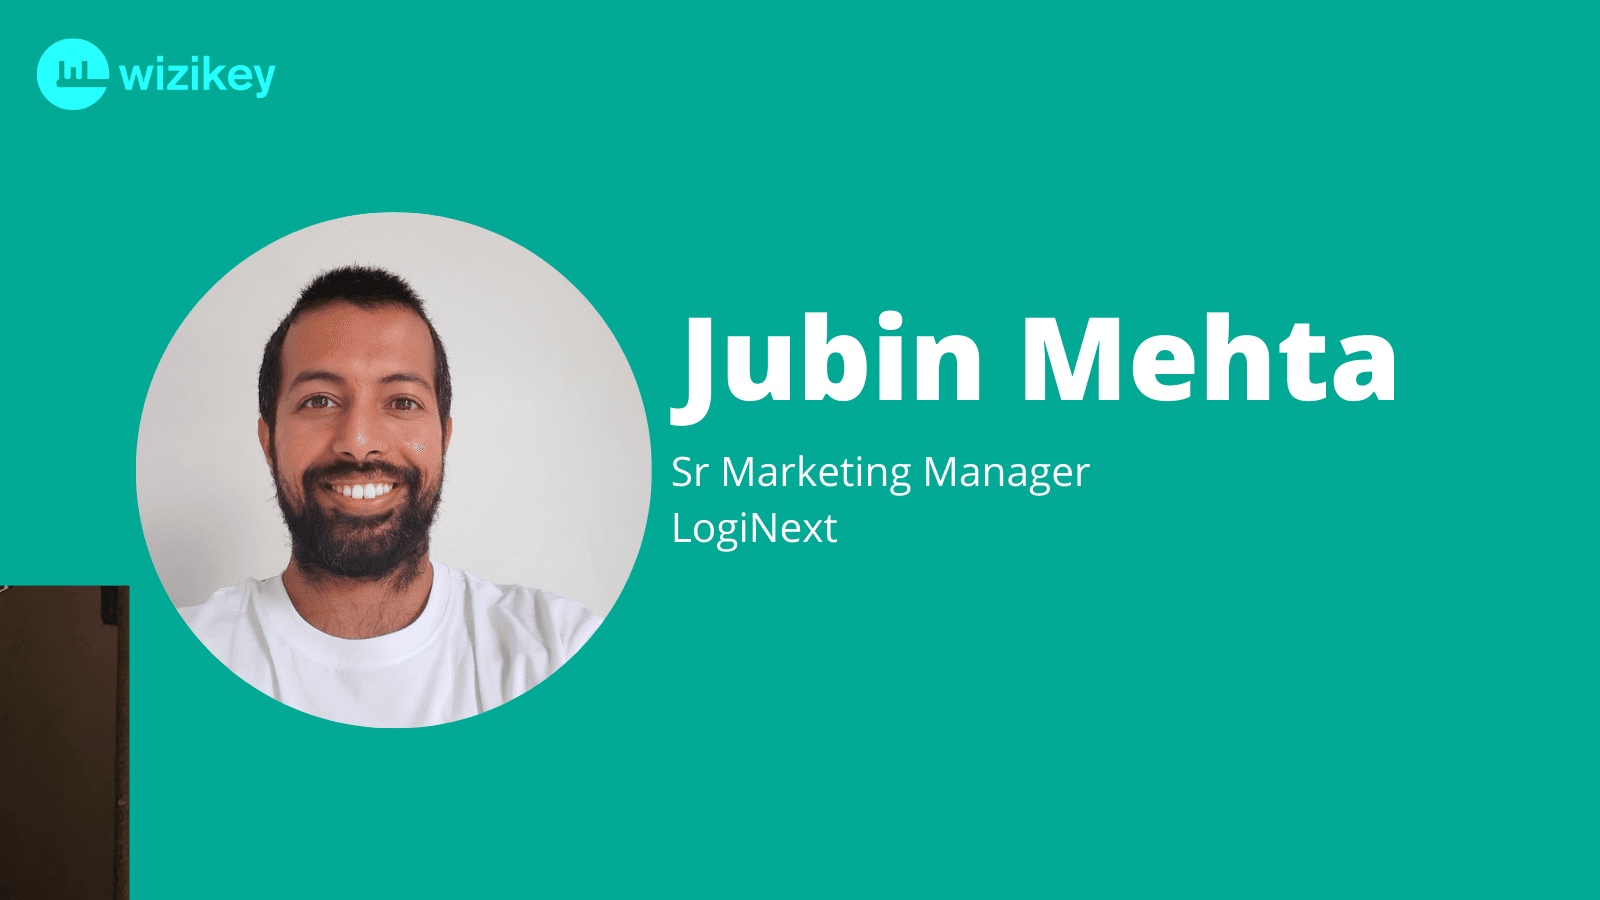 Data helps to validate your hypothesis: Jubin from LogiNext